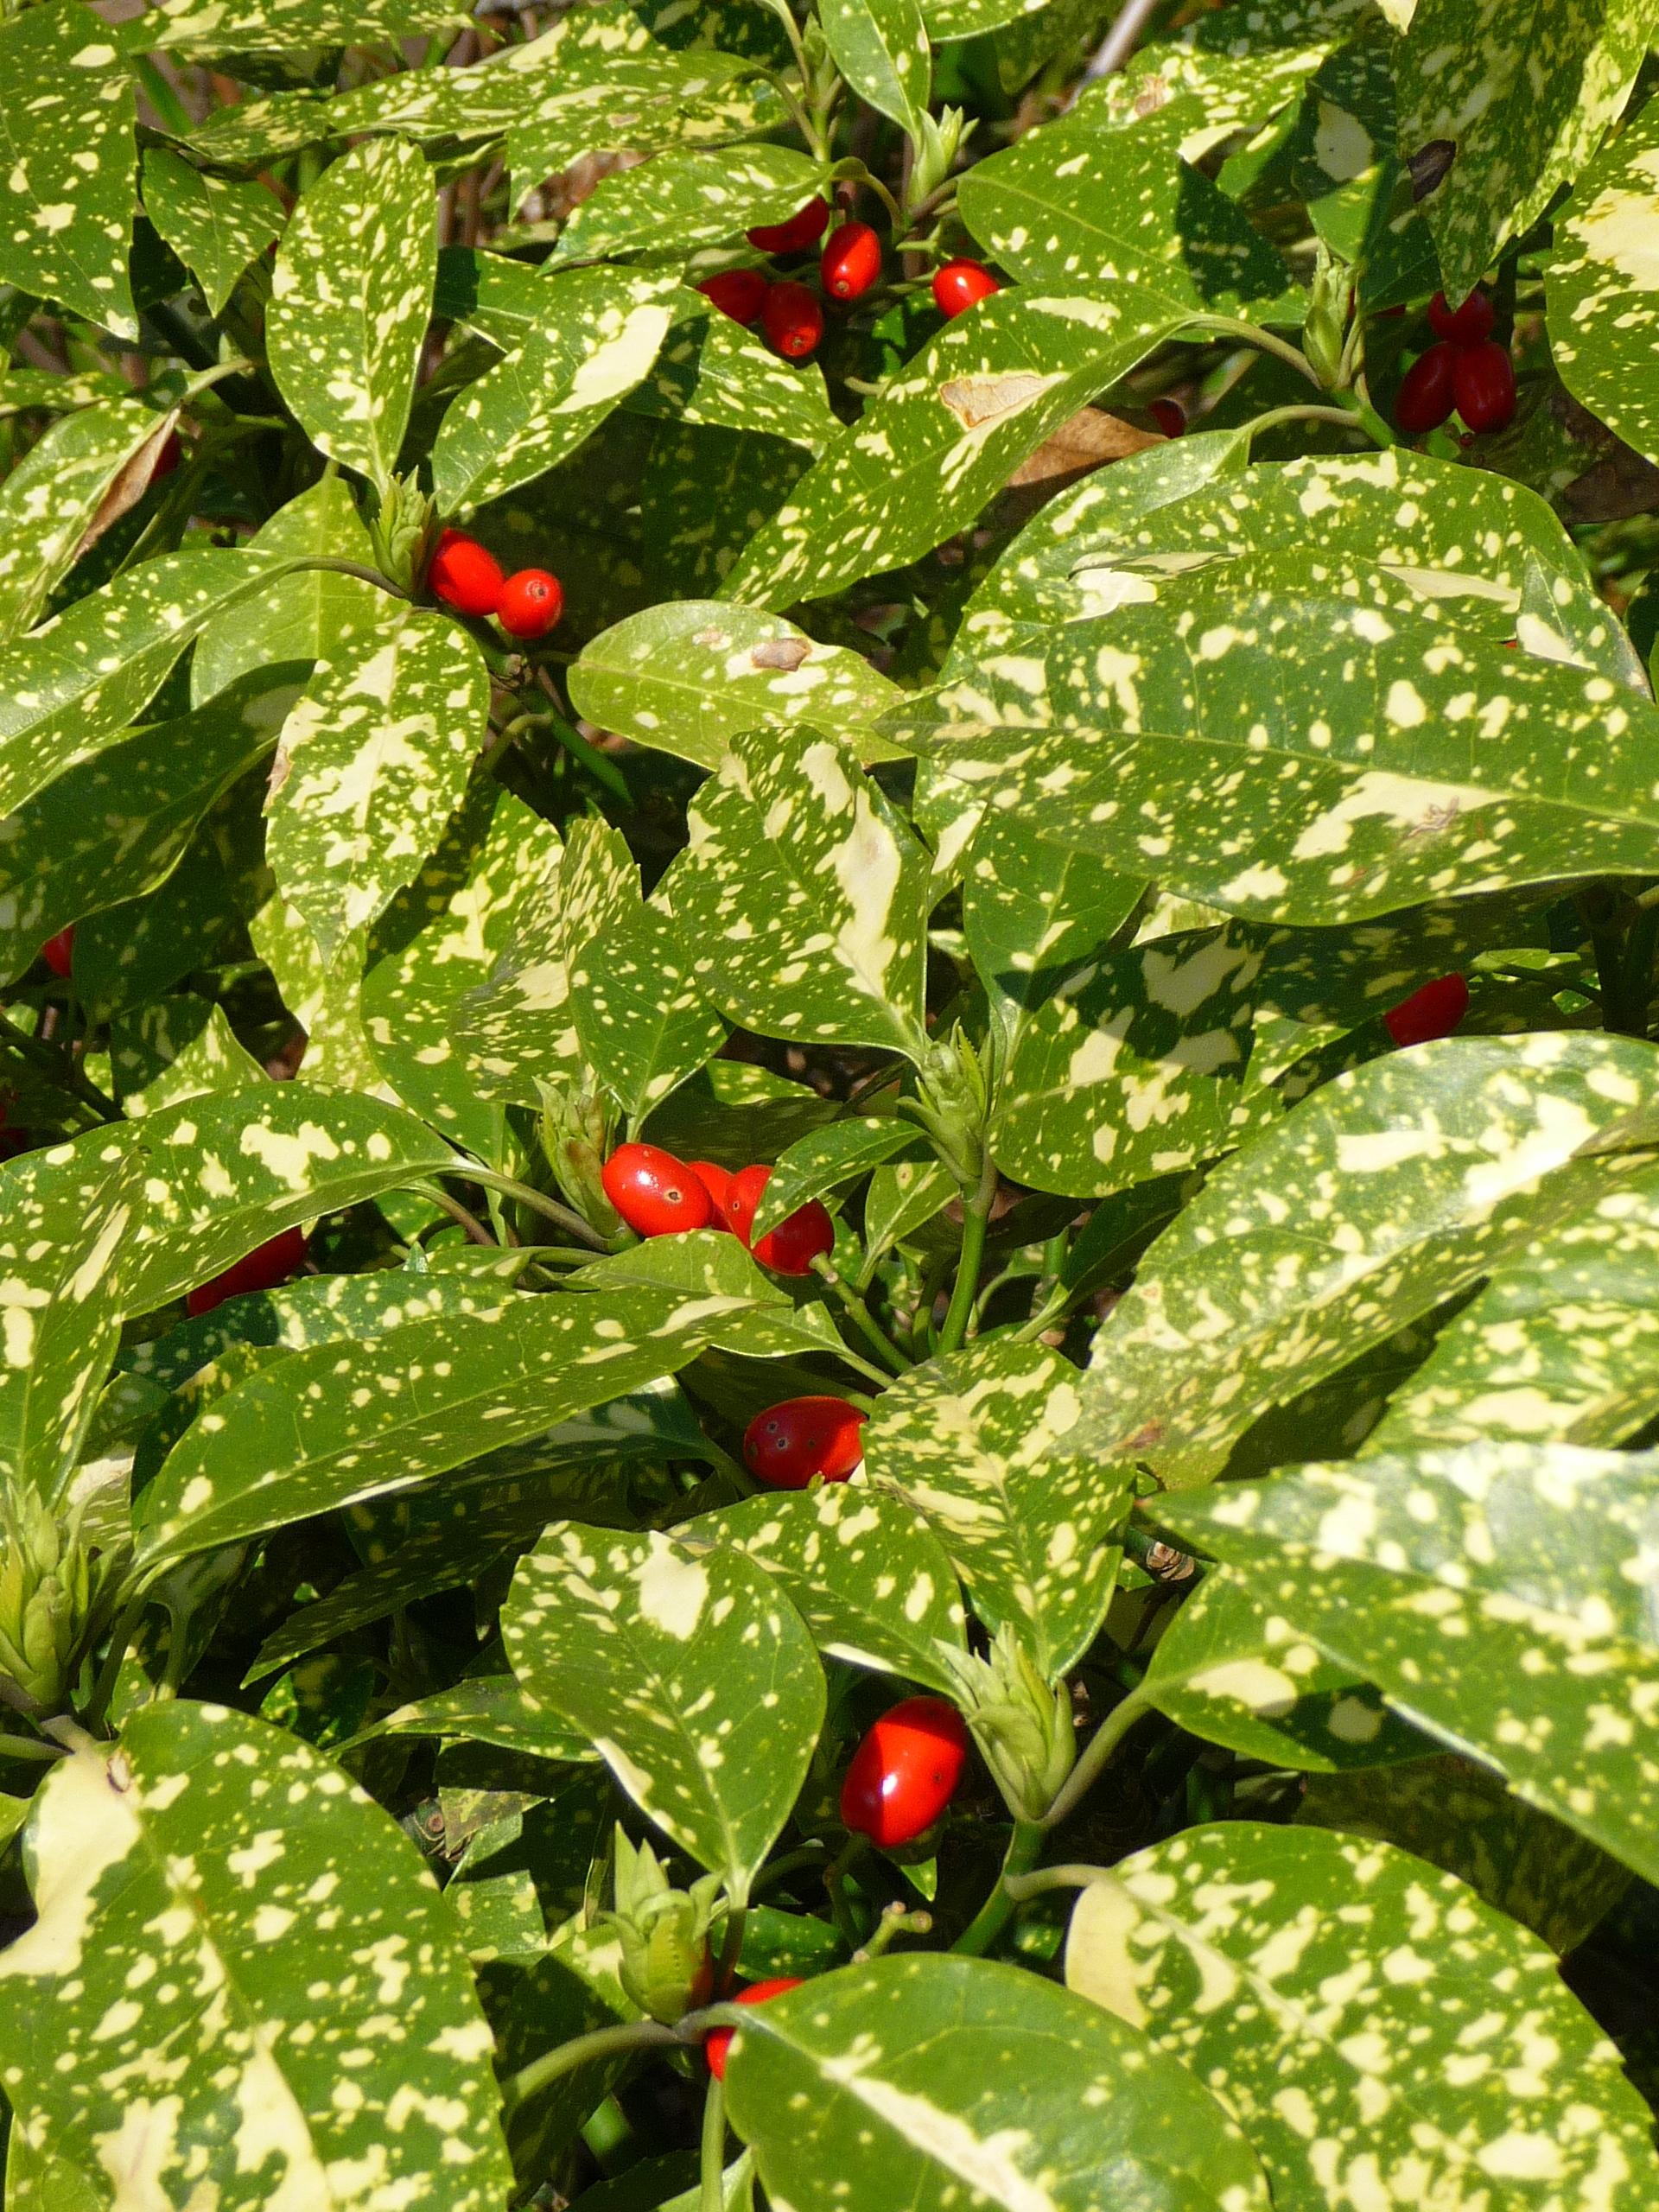 Red fruit with green-white leaves , green buds and stems.